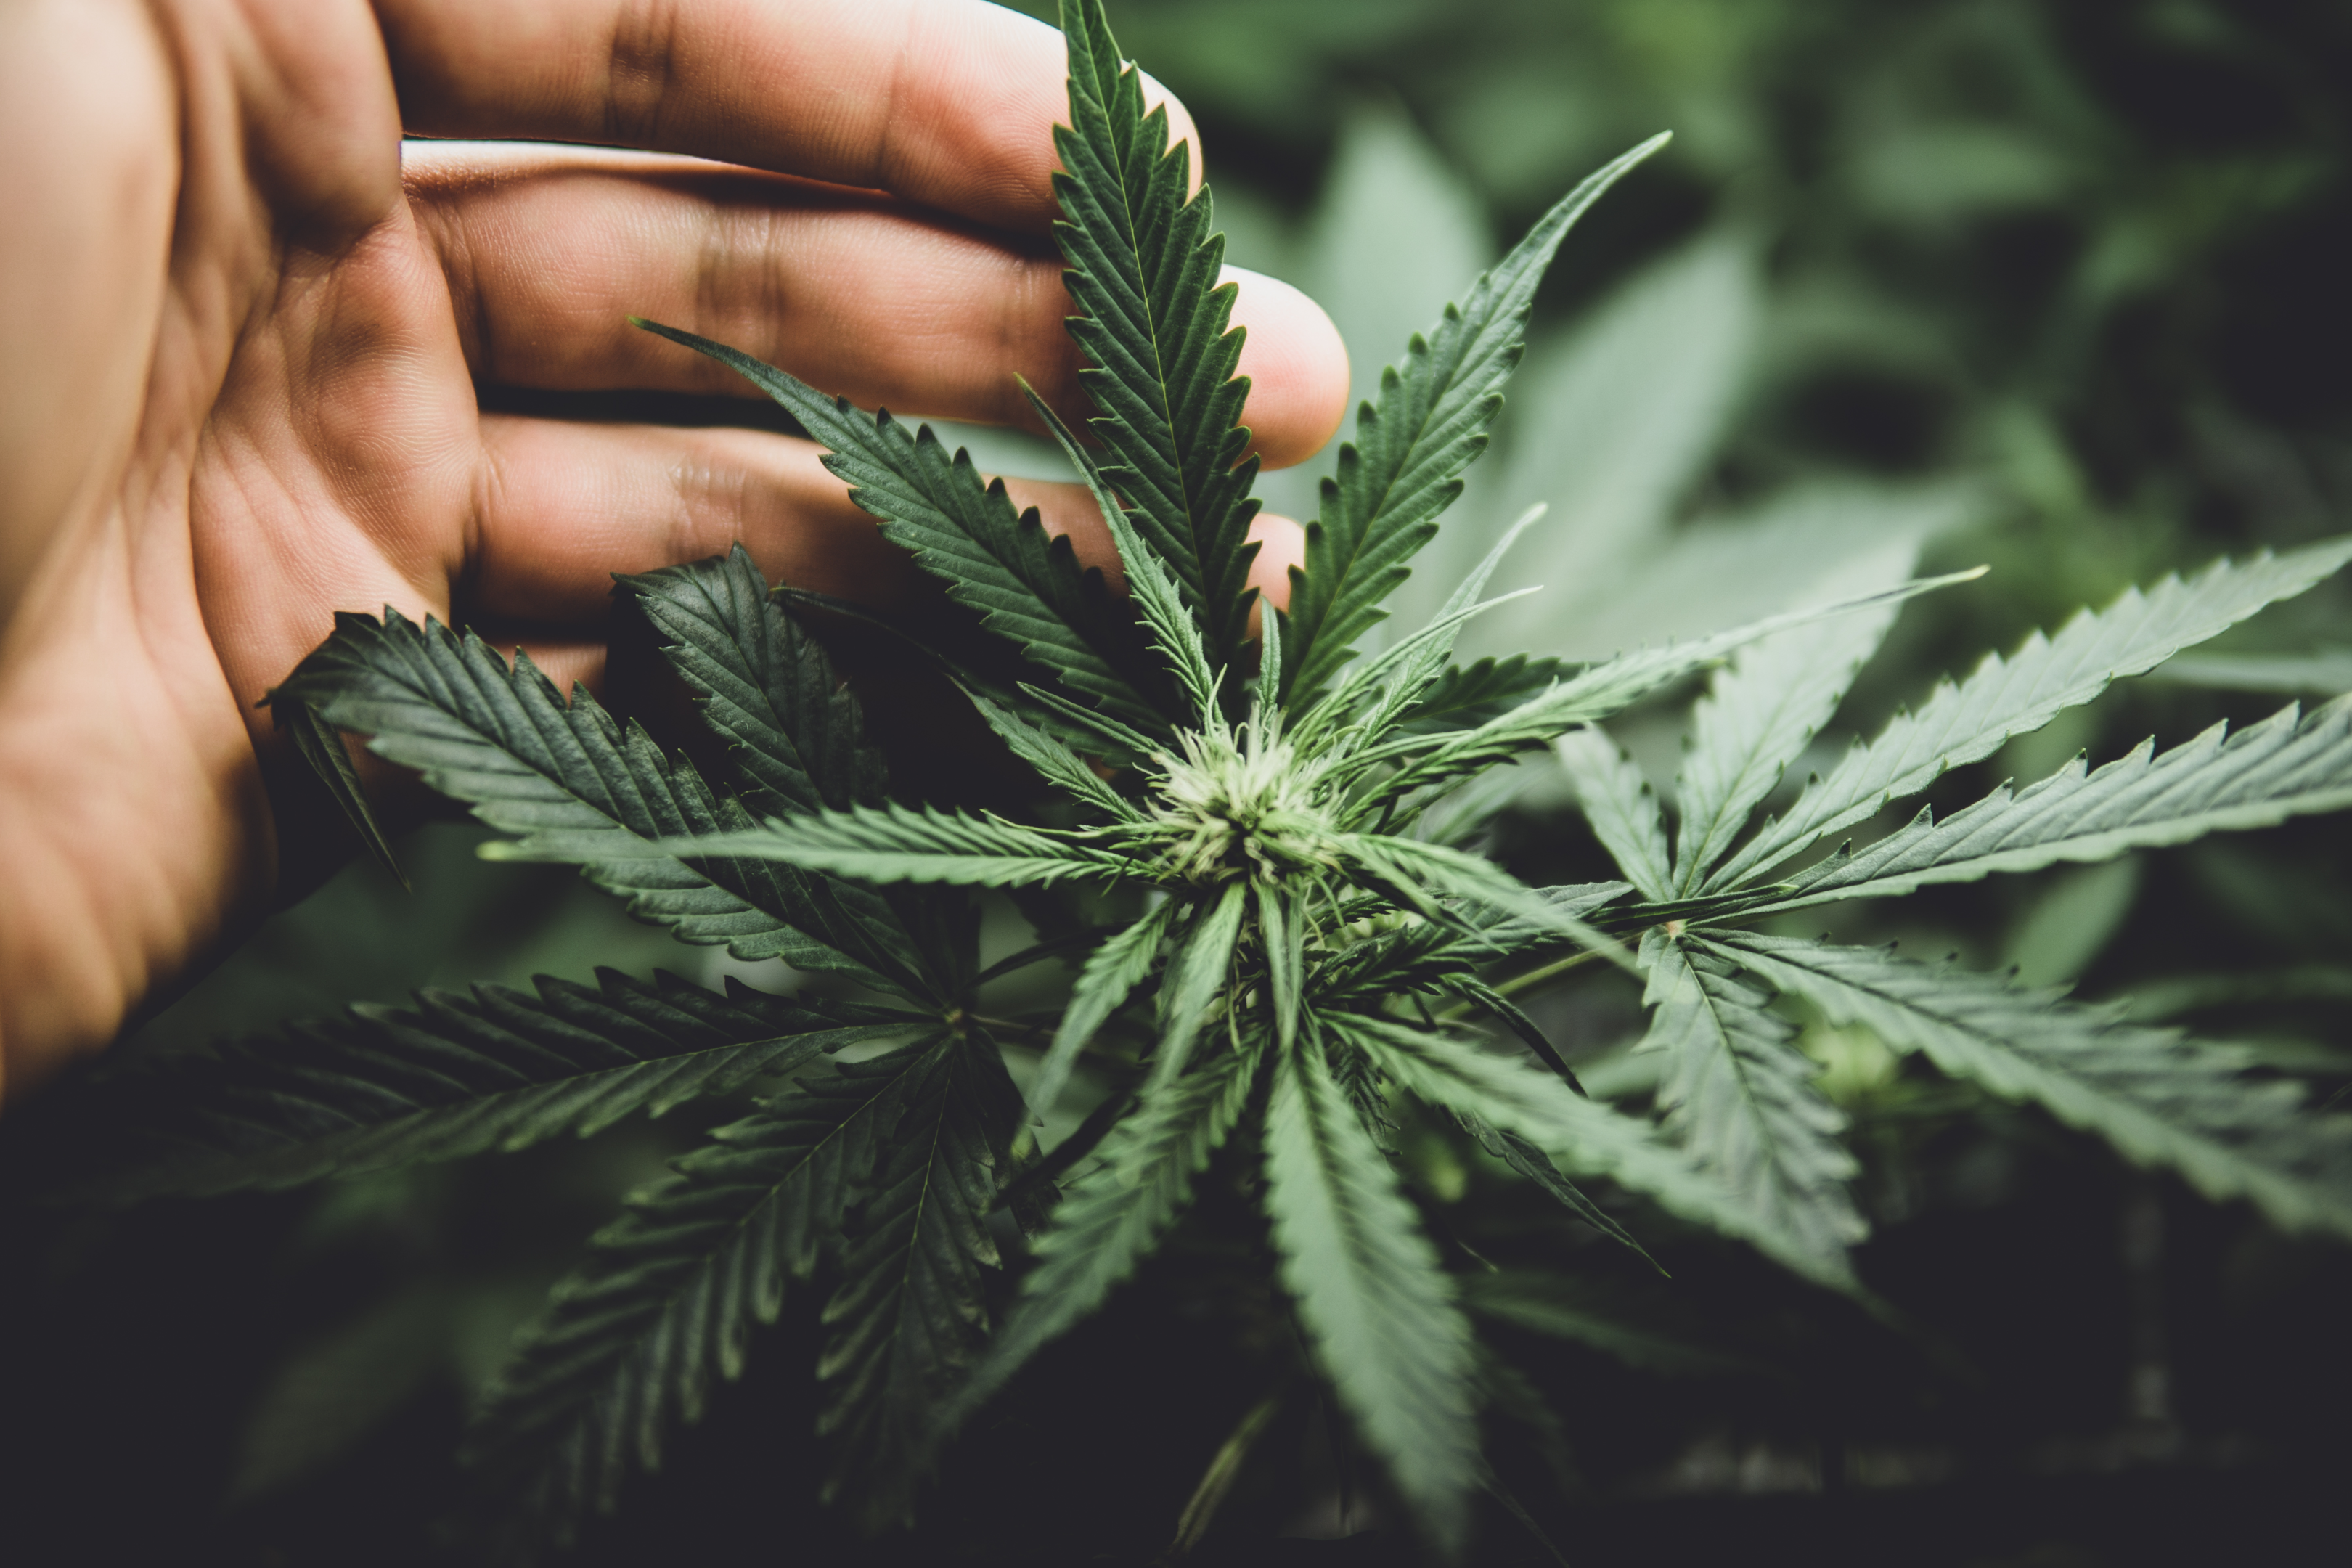 There are not only female plants. Hemp has both male and female. Many factors go into farming hemp these days: insect pests, developed fertilizer recommendations, soil test, planting depth, well drained soils, THC levels, and many more.